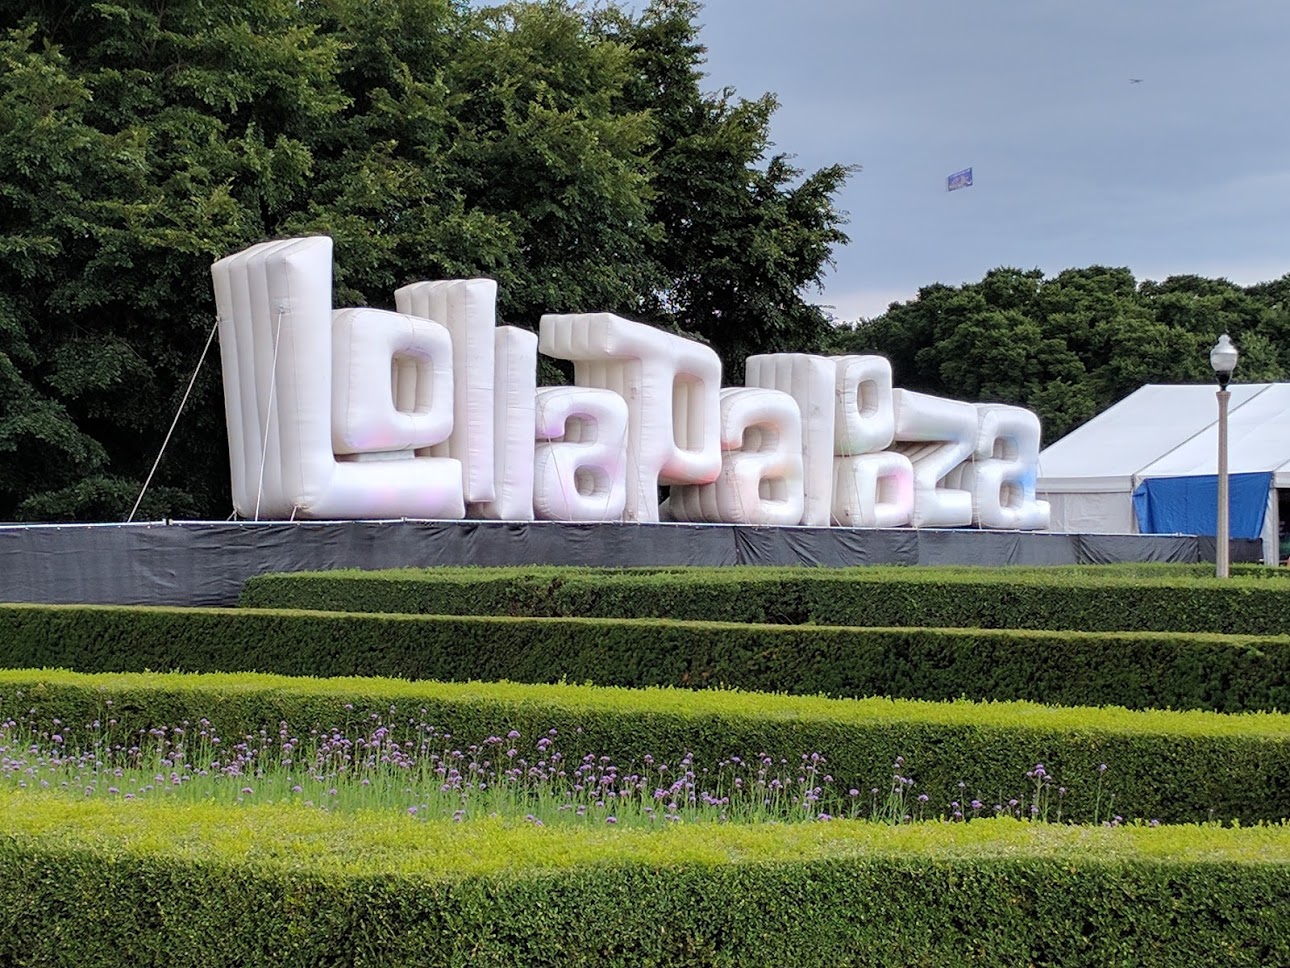 Lollapalooza: What to Expect at a Music Festival